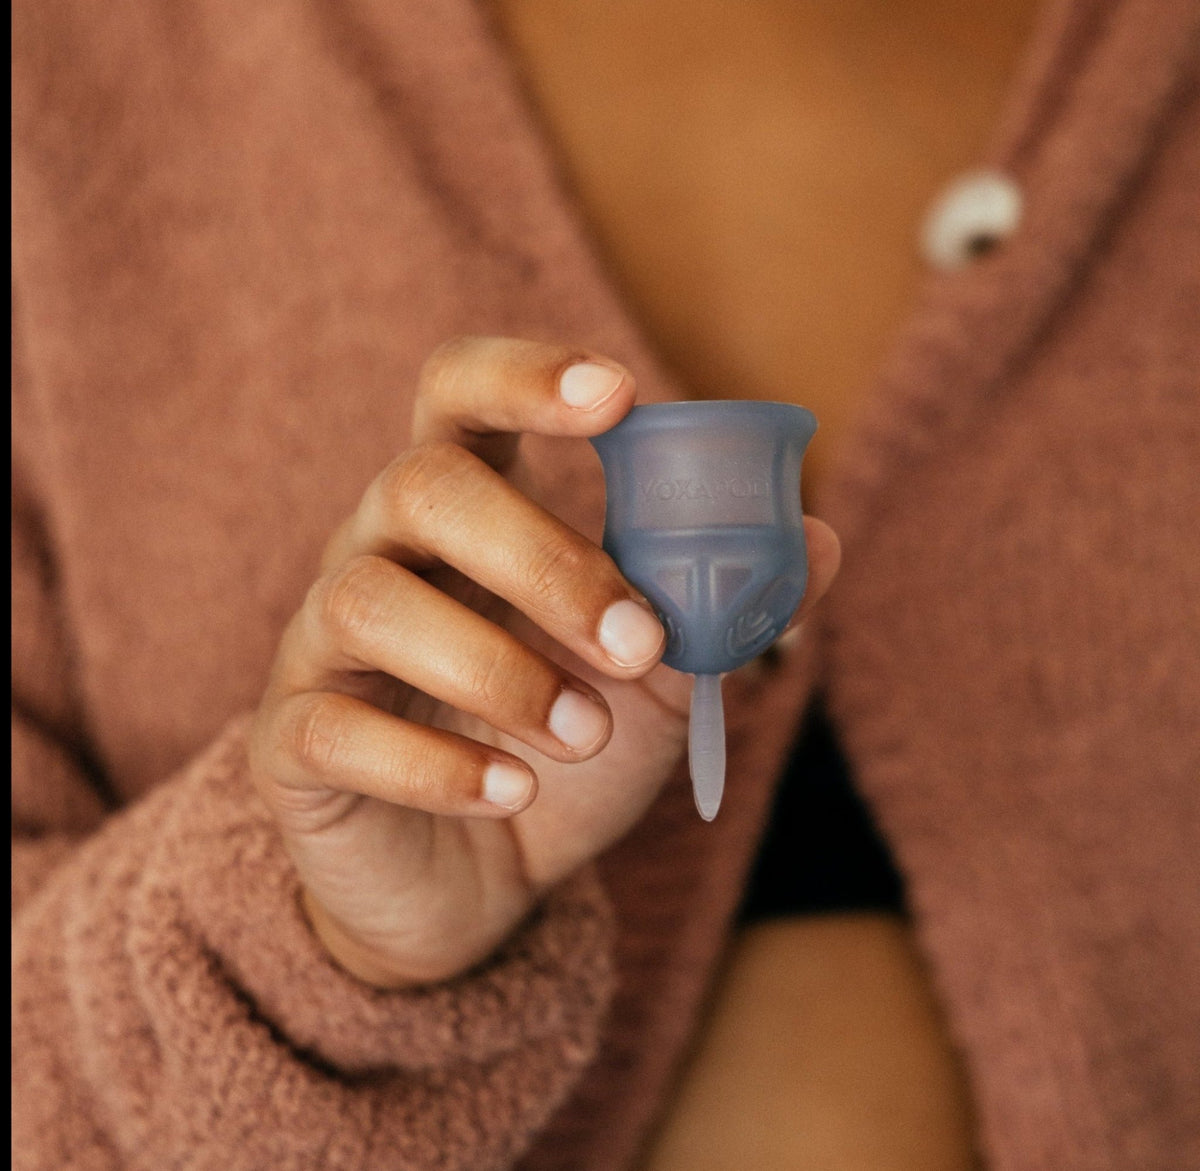 VOXAPOD Menstrual Cup Duo (2 Cups) - VOXAPOD® soft reusable medical grade silicone fda approved period cup